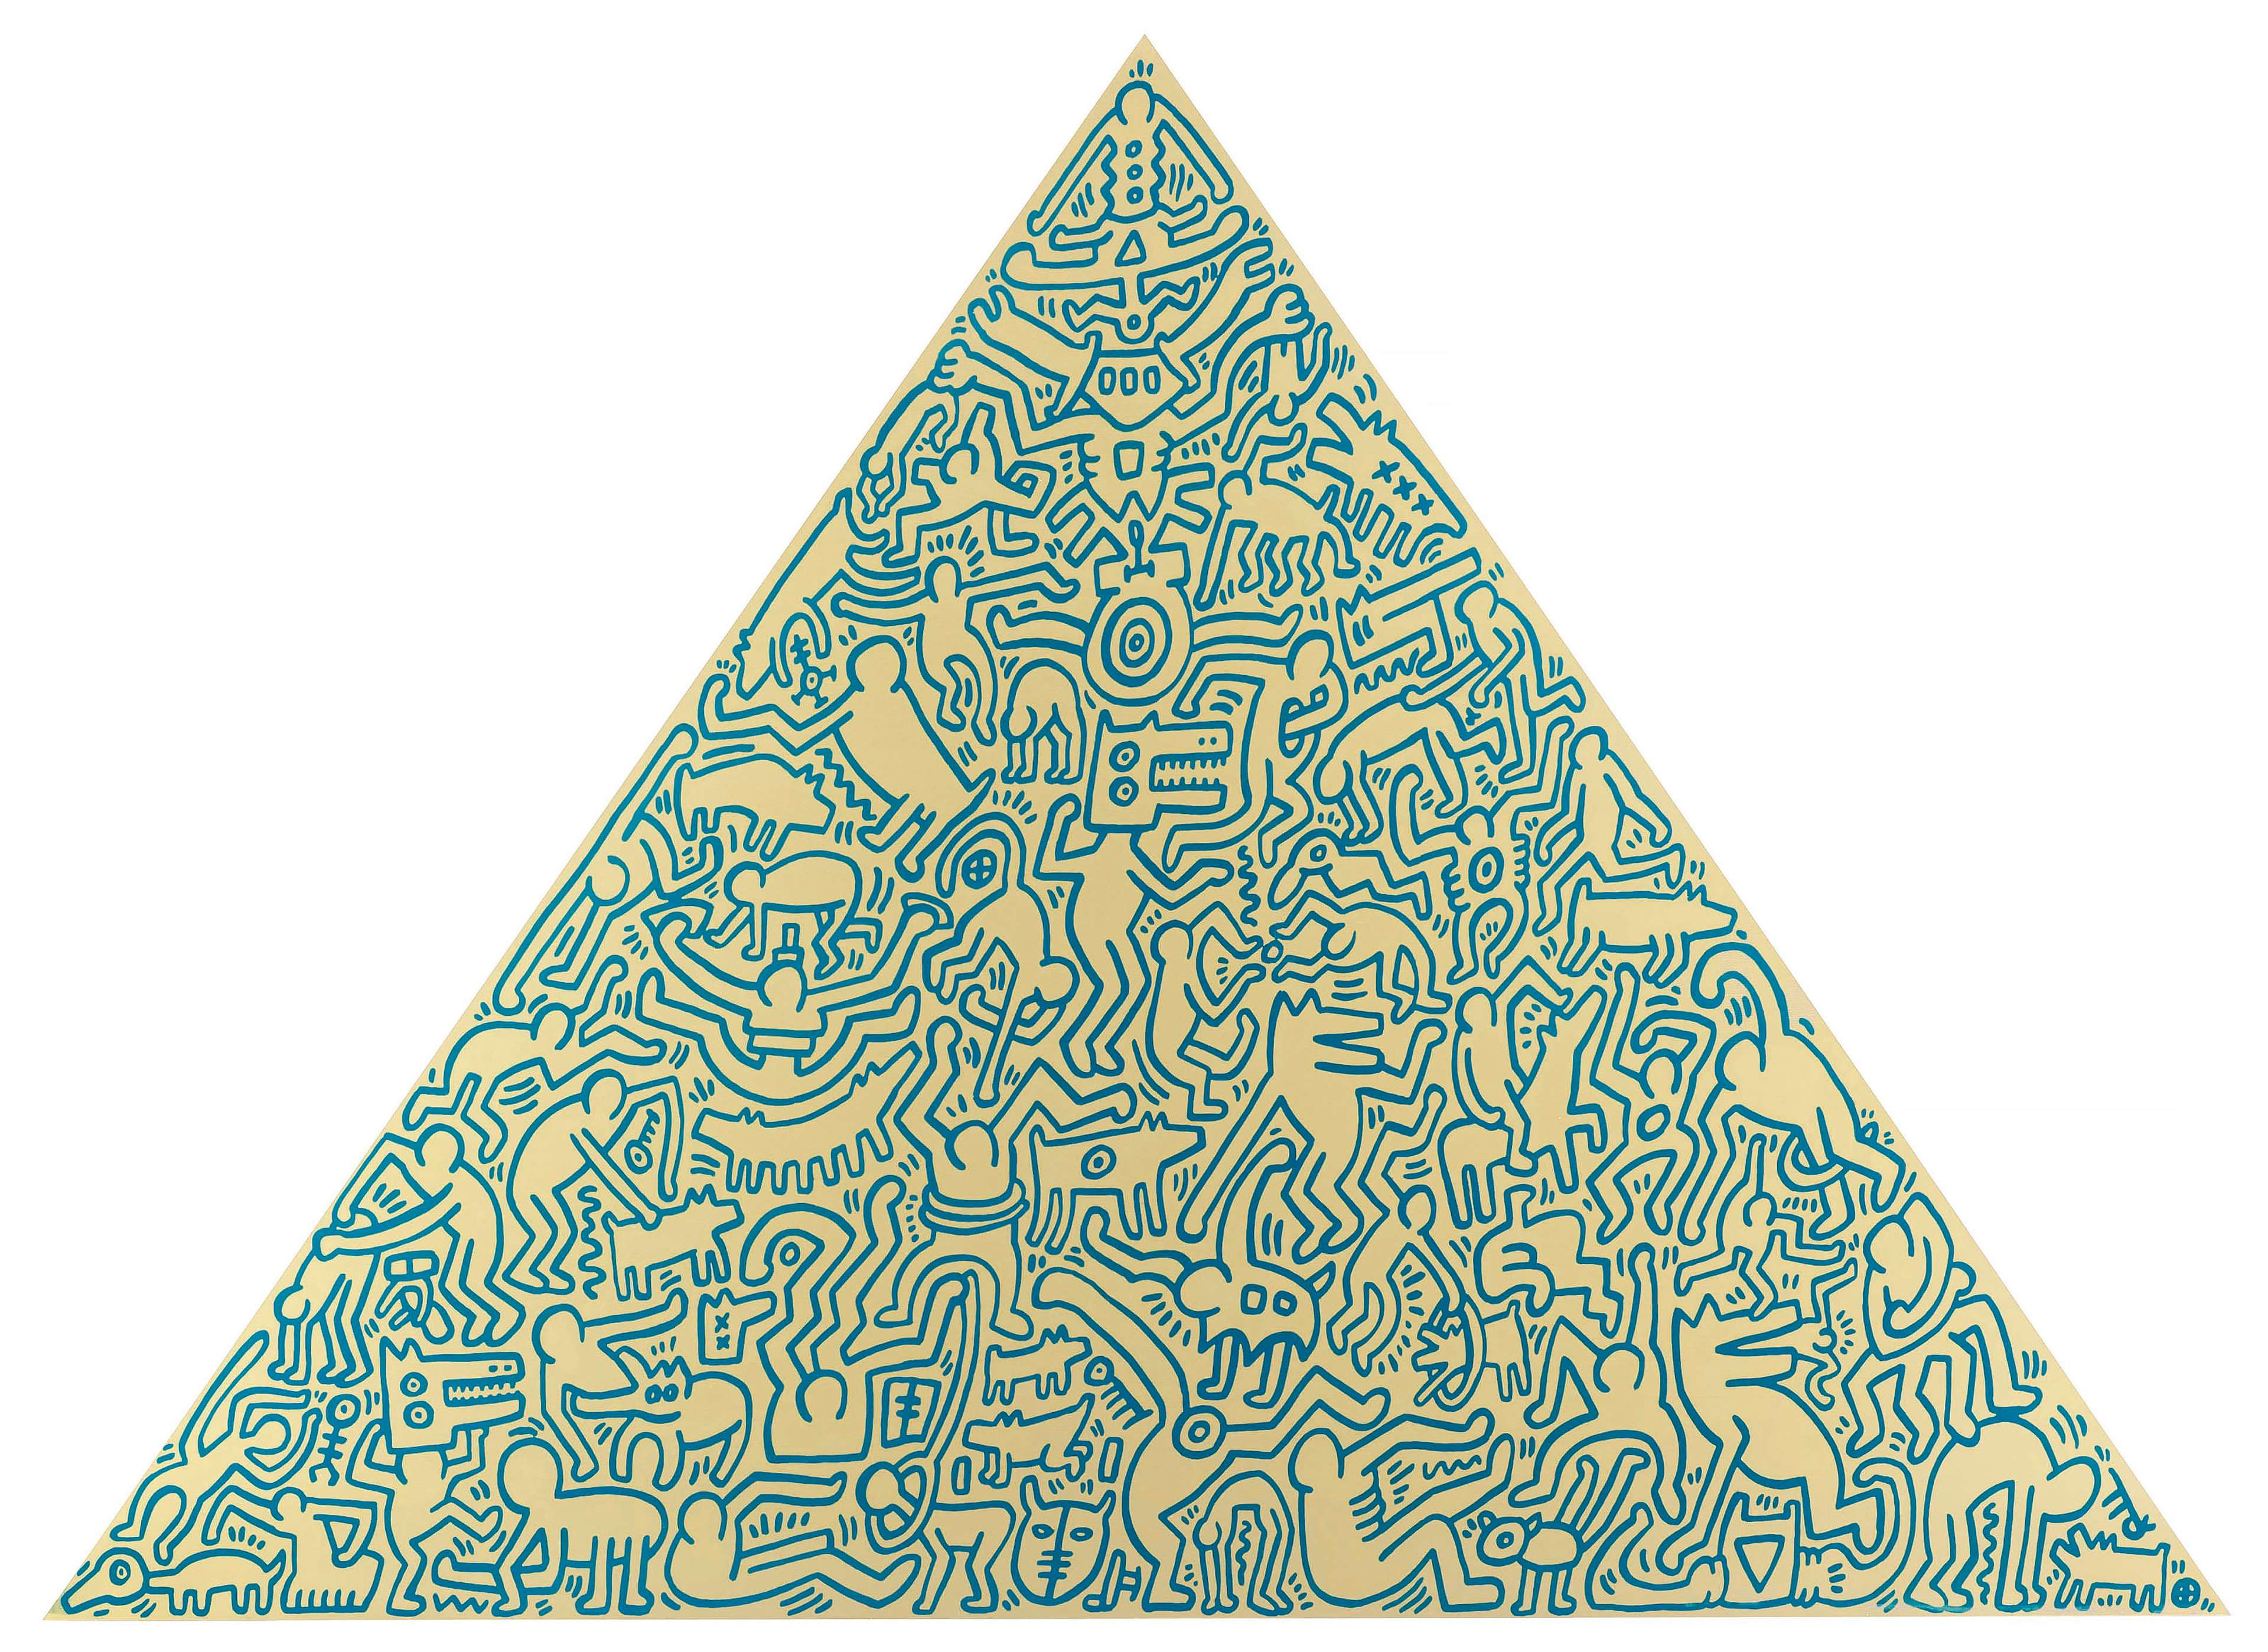 Keith Haring’s Pyramid (gold II). A Pop Art screenprint of a gold triangle with blue figures in various poses inside of it.Keith Haring’s Pyramid (gold II). A Pop Art screenprint of a gold triangle with blue figures in various poses inside of it.